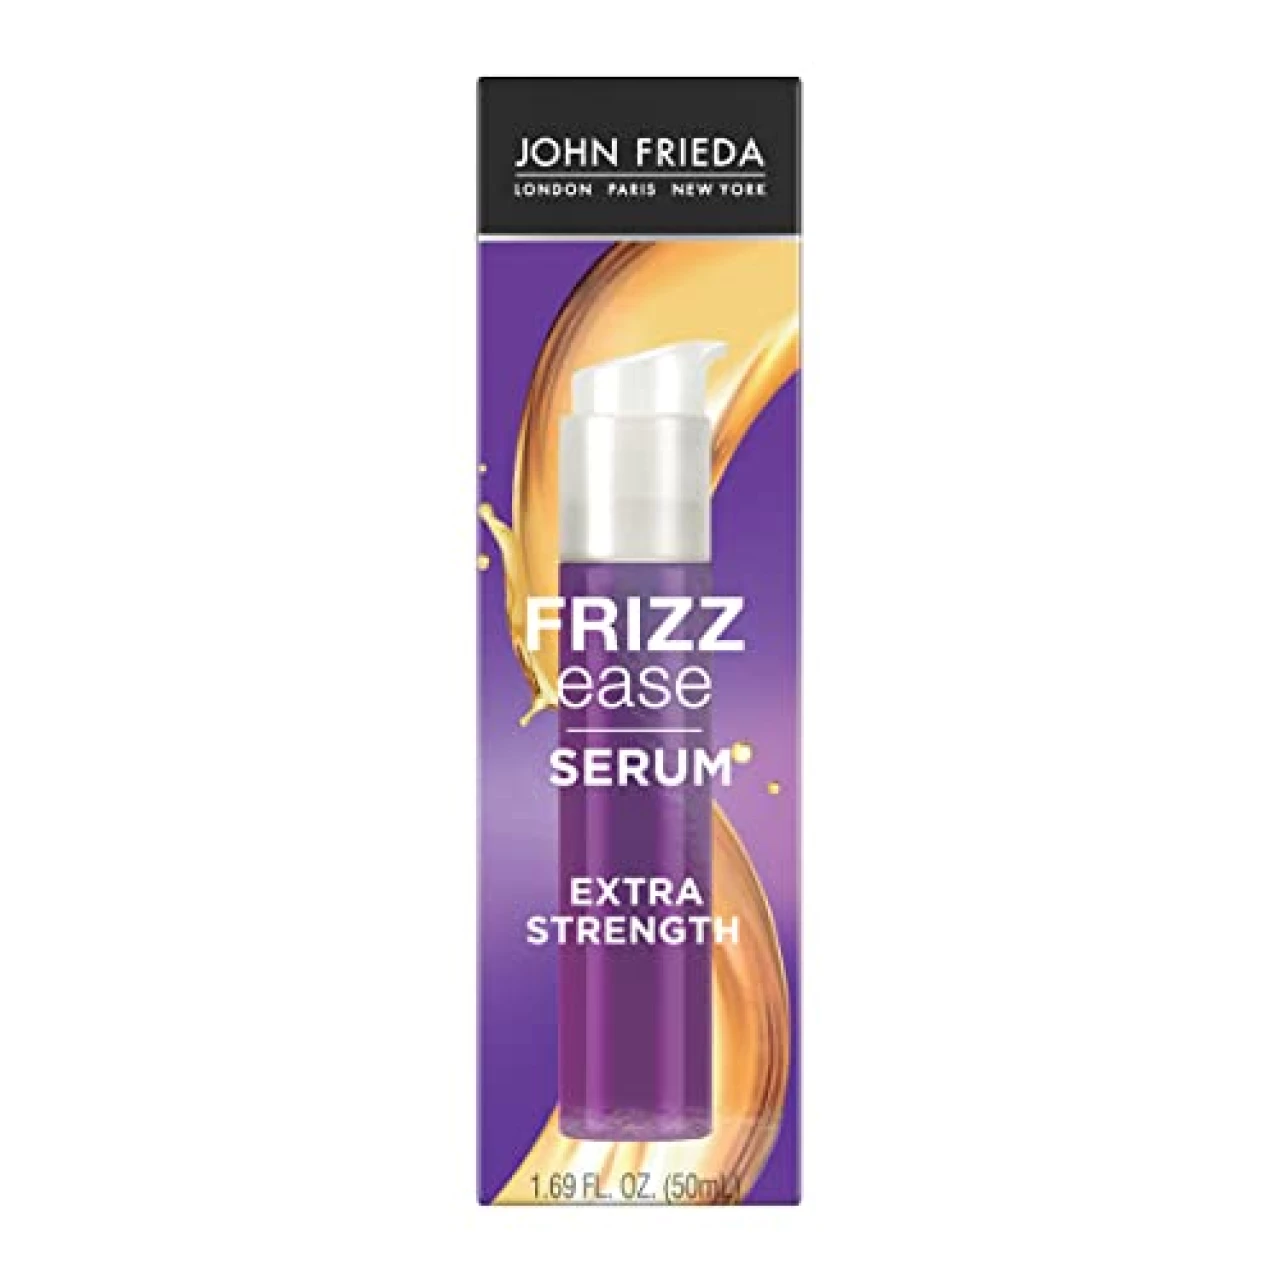 John Frieda Frizz Ease Extra Strength Hair Serum, Nourishing Hair Oil for Frizz Control, Heat Protectant with Argan &amp; Coconut Oils, 1.69 fl oz (Package May Vary)